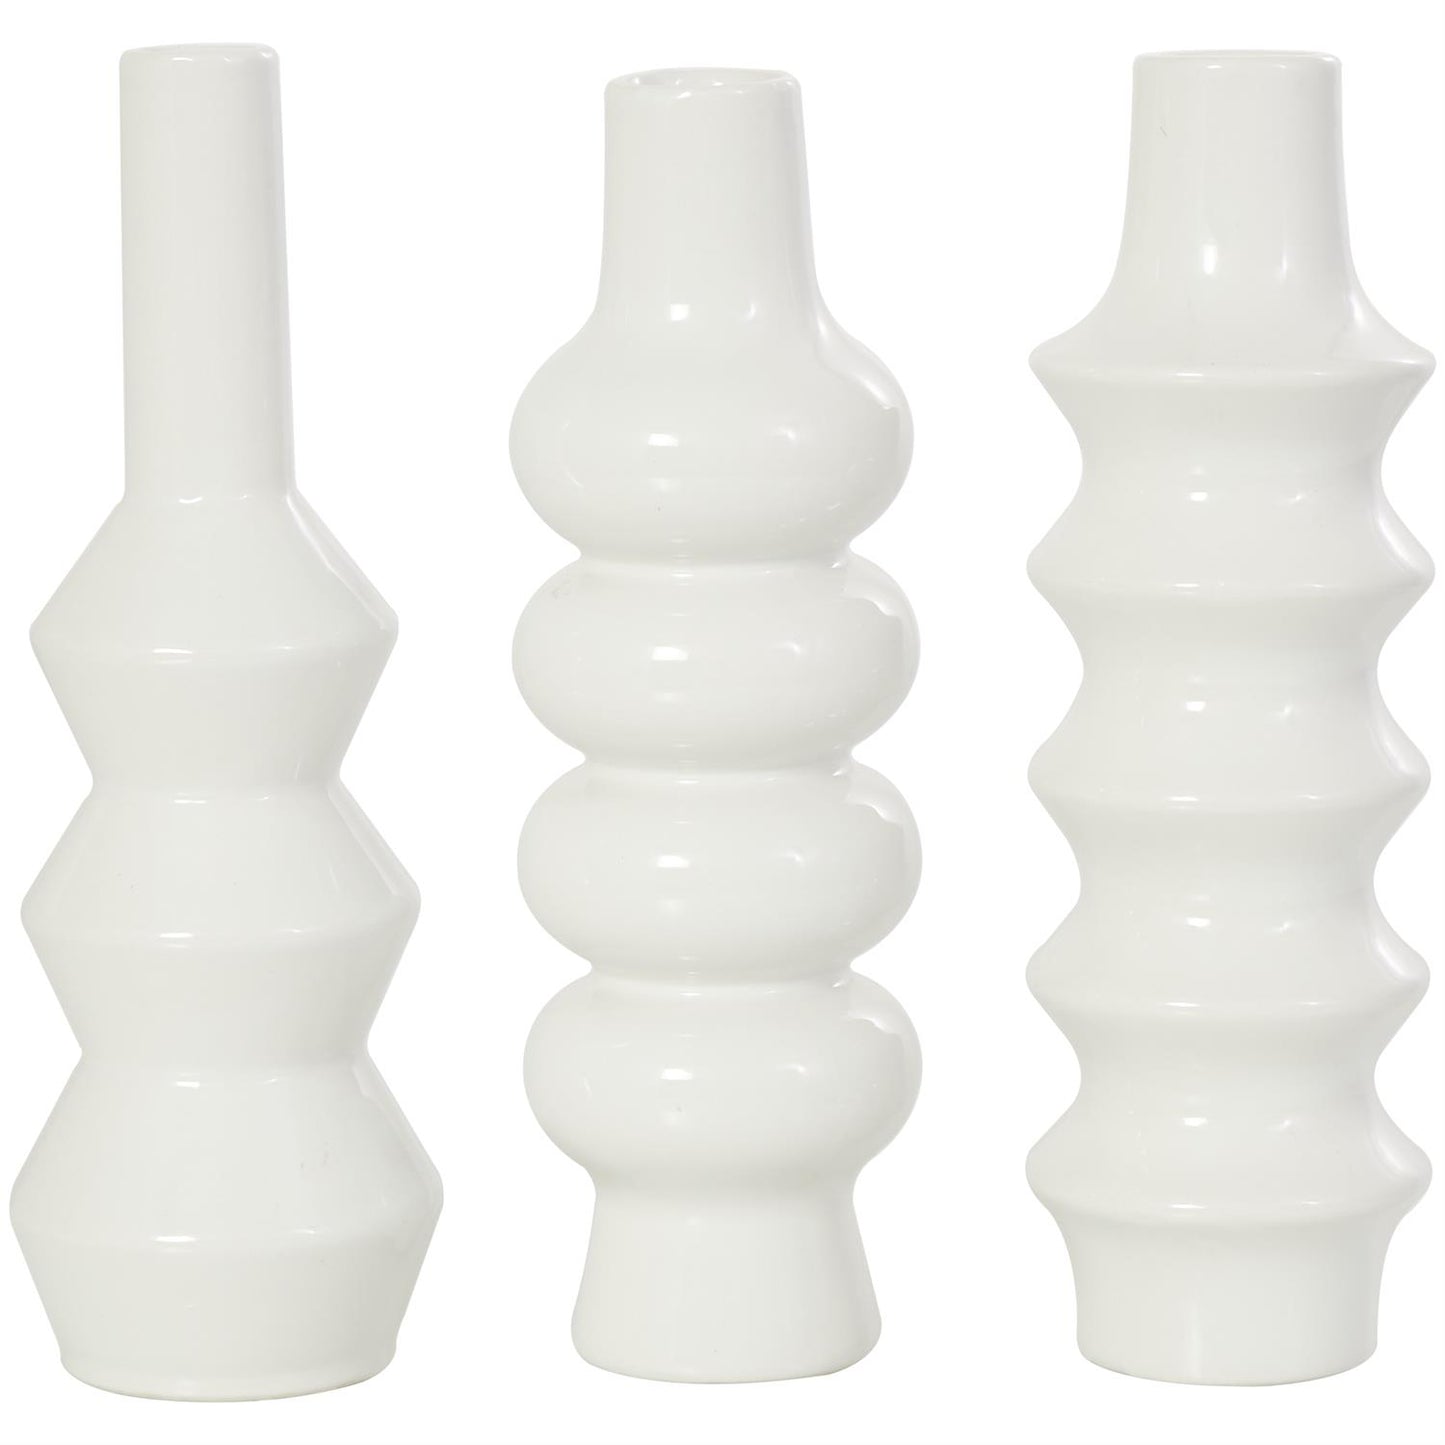 White ceramic Abstract Bubble inspired Vase Set of 3